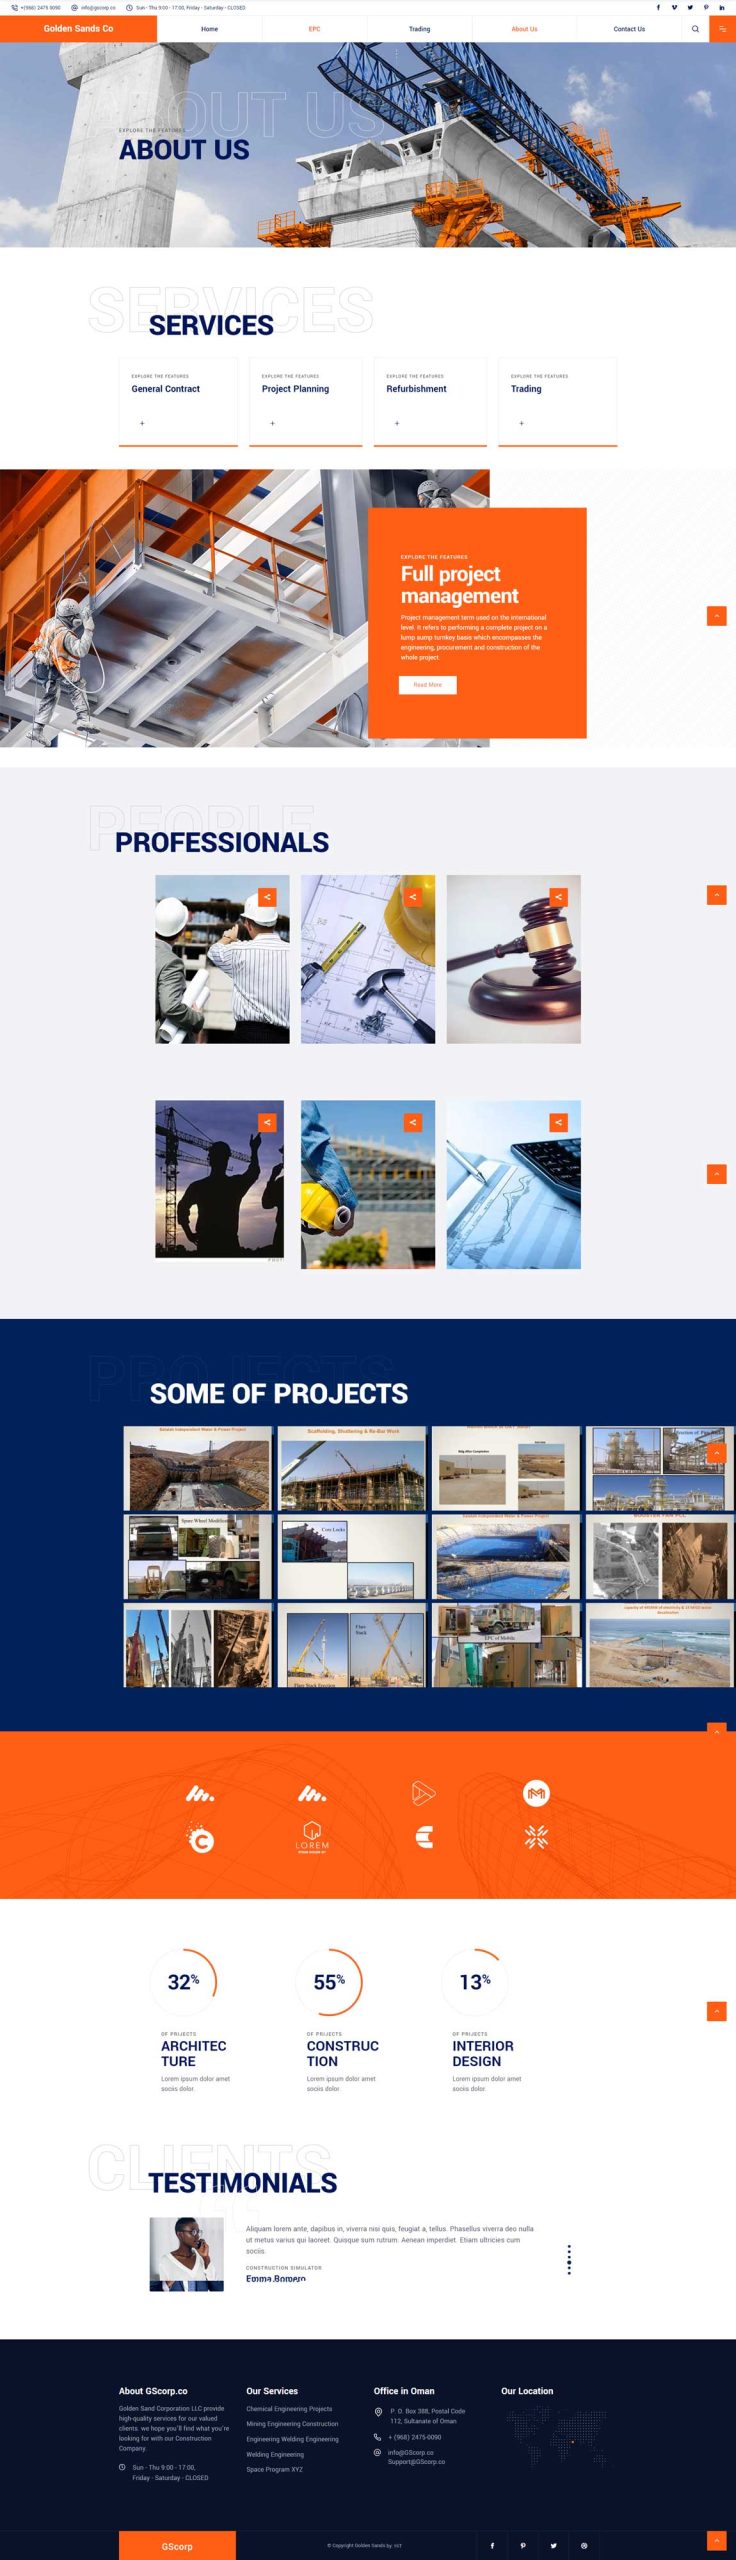 Construction Website design in Oman - GSCORP.co HiT Land